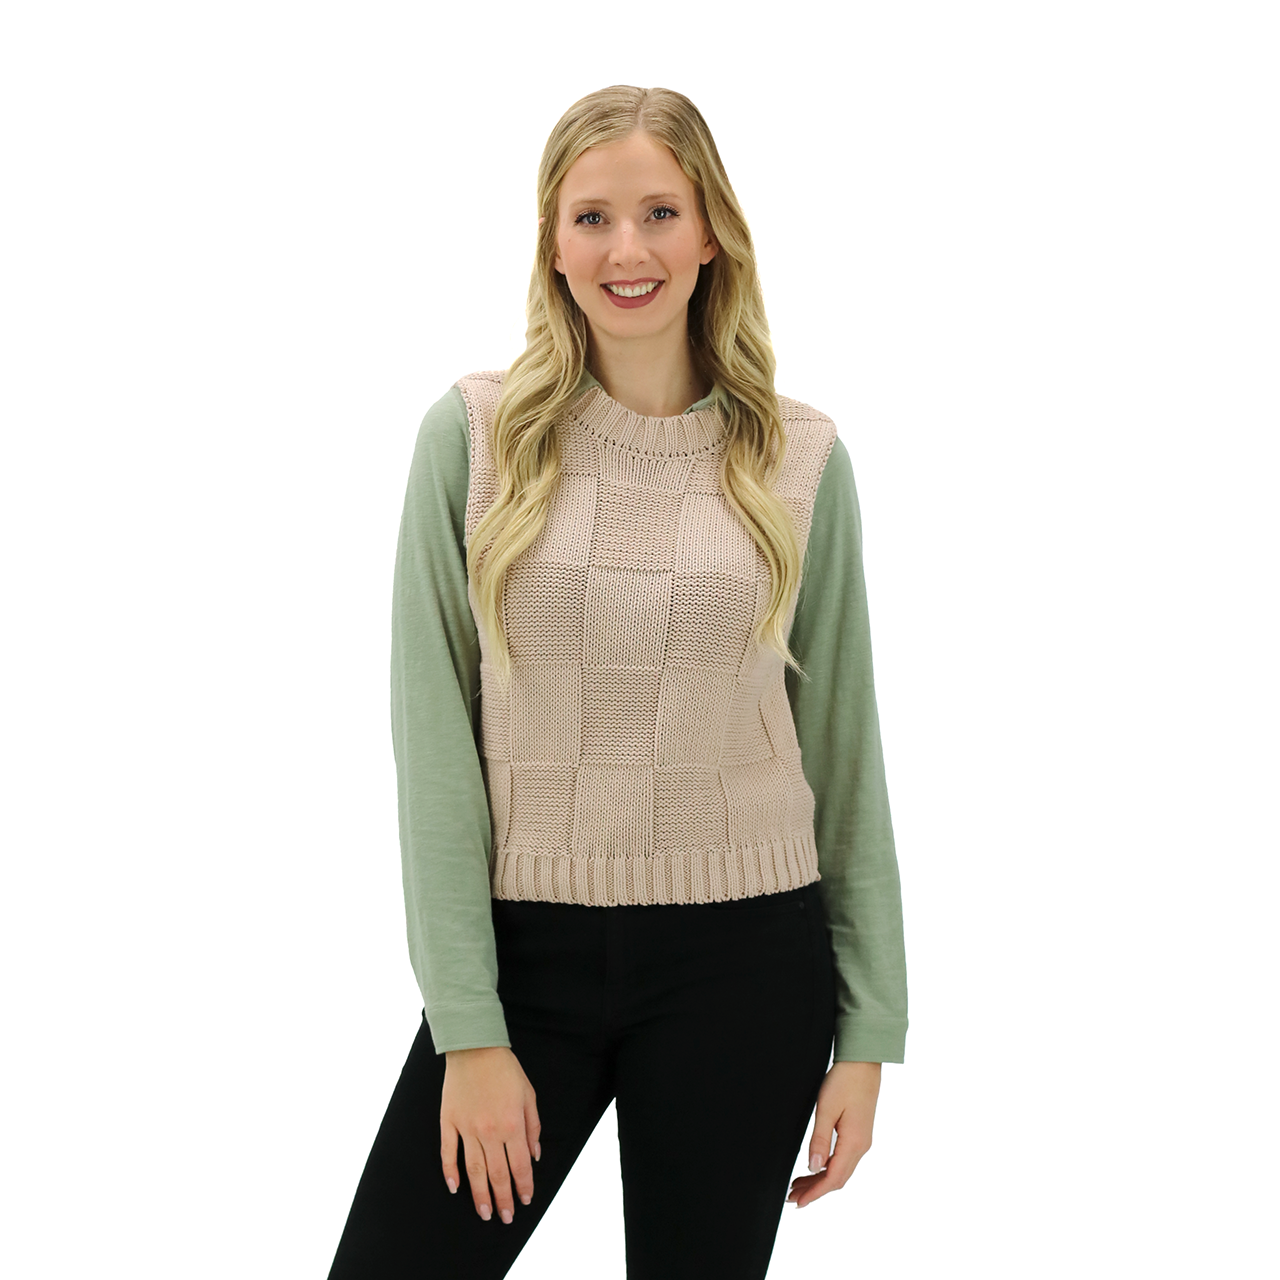 Basket Weave Sweater - Natural by Donna Wilson. 100% lambswool.